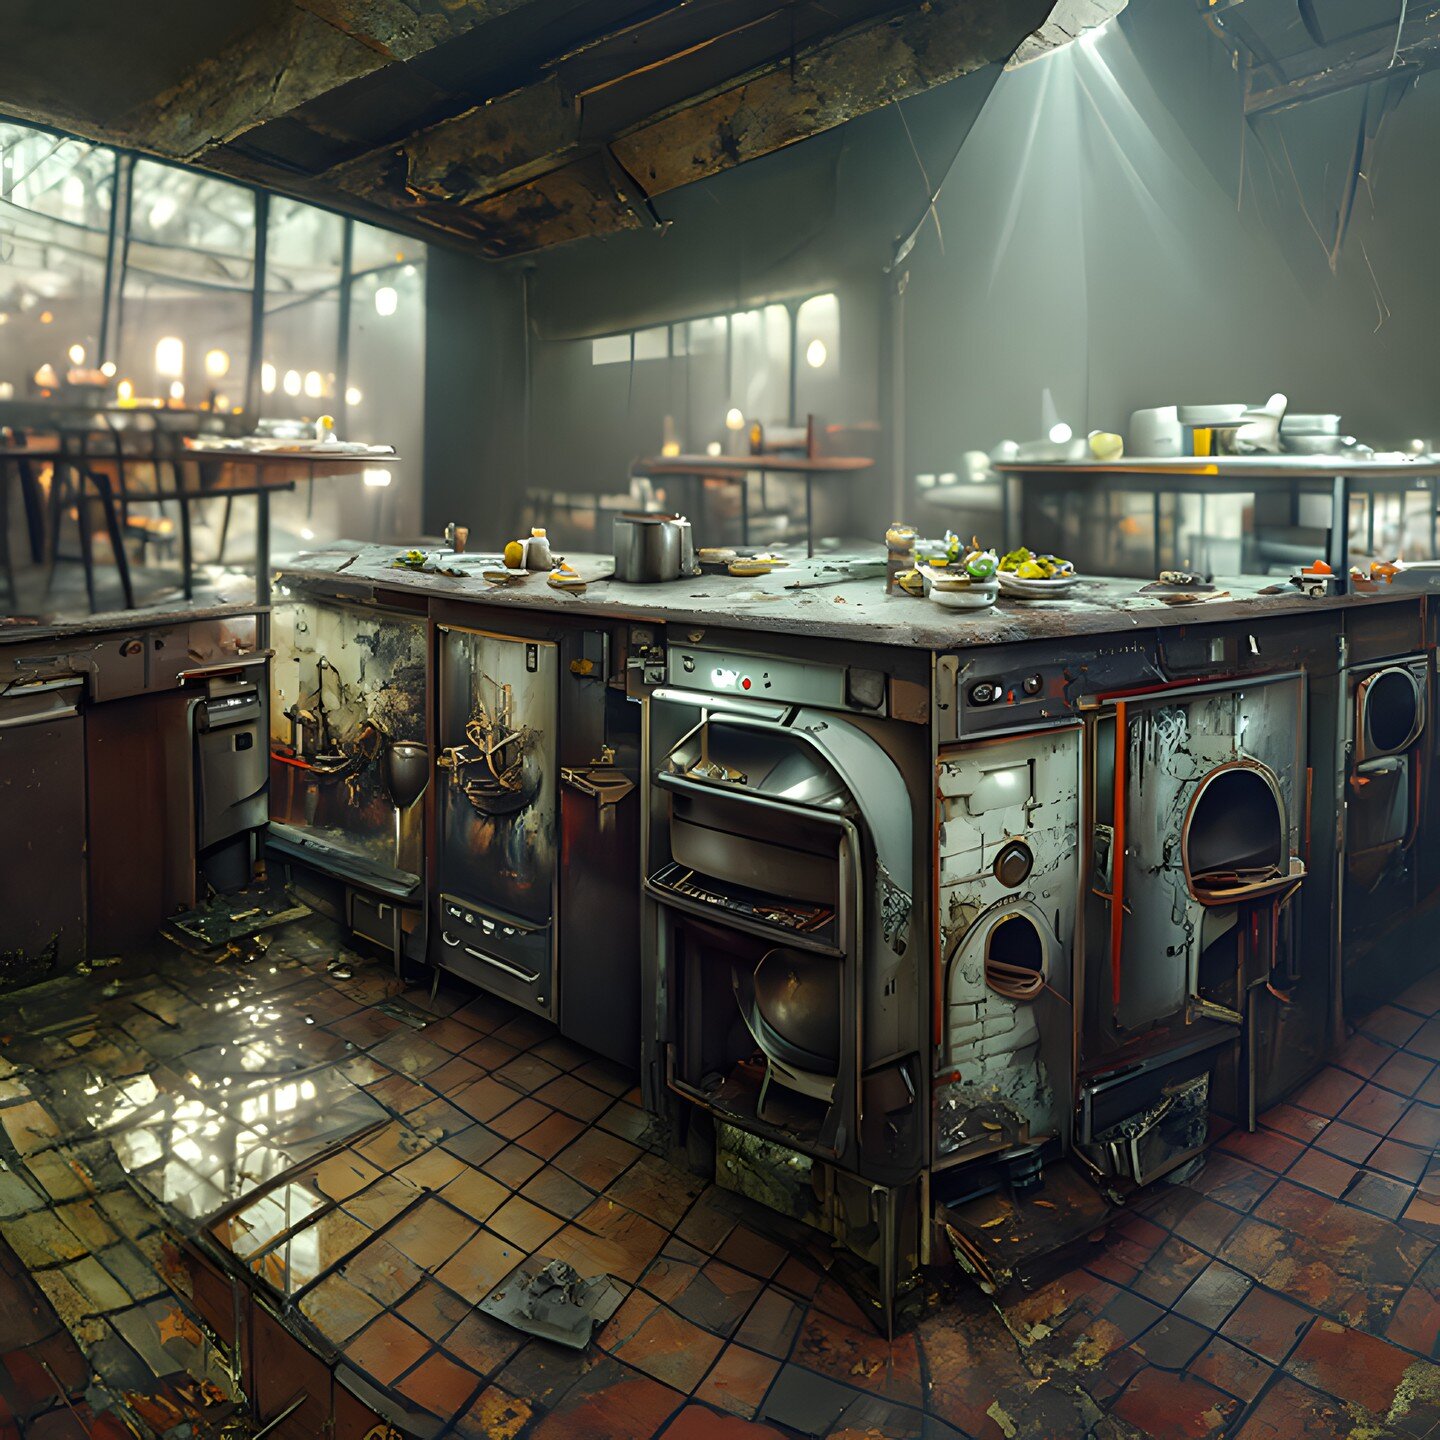 &quot;Minimum With Age&quot; (AI Art 🖥️🎨)

Made with Disco Diffusion

#kitchen #diner #kitchendesign #retro #throwback #architecture #archidaily #abandoned #conceptart #ai #aiart #aiartwork #aiartcommunity #generativeart #discodiffusion #machinelea